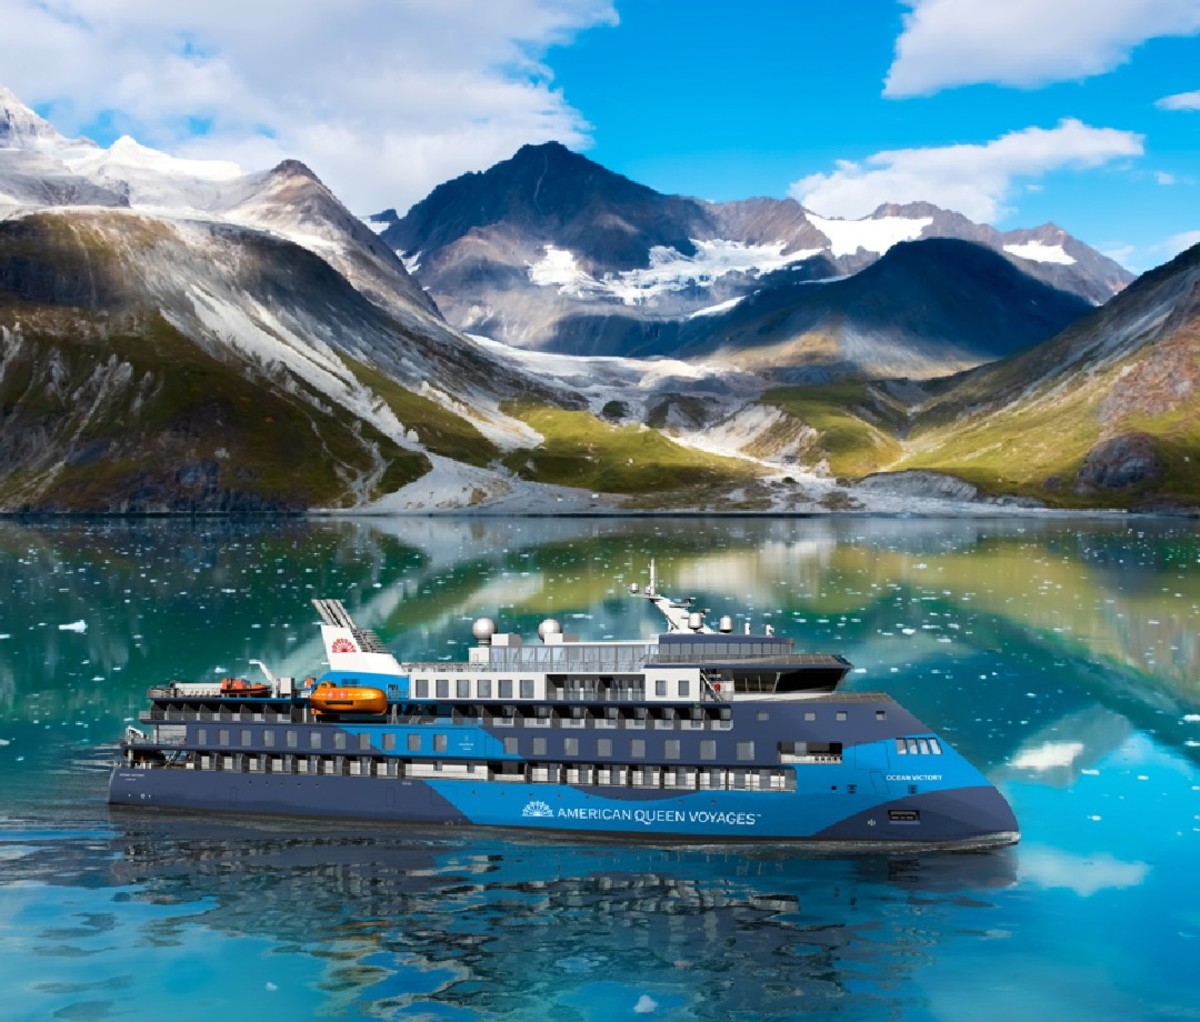 American Queen Voyages cruise ship glides through a glassy glacier-lined inlet in Alaska